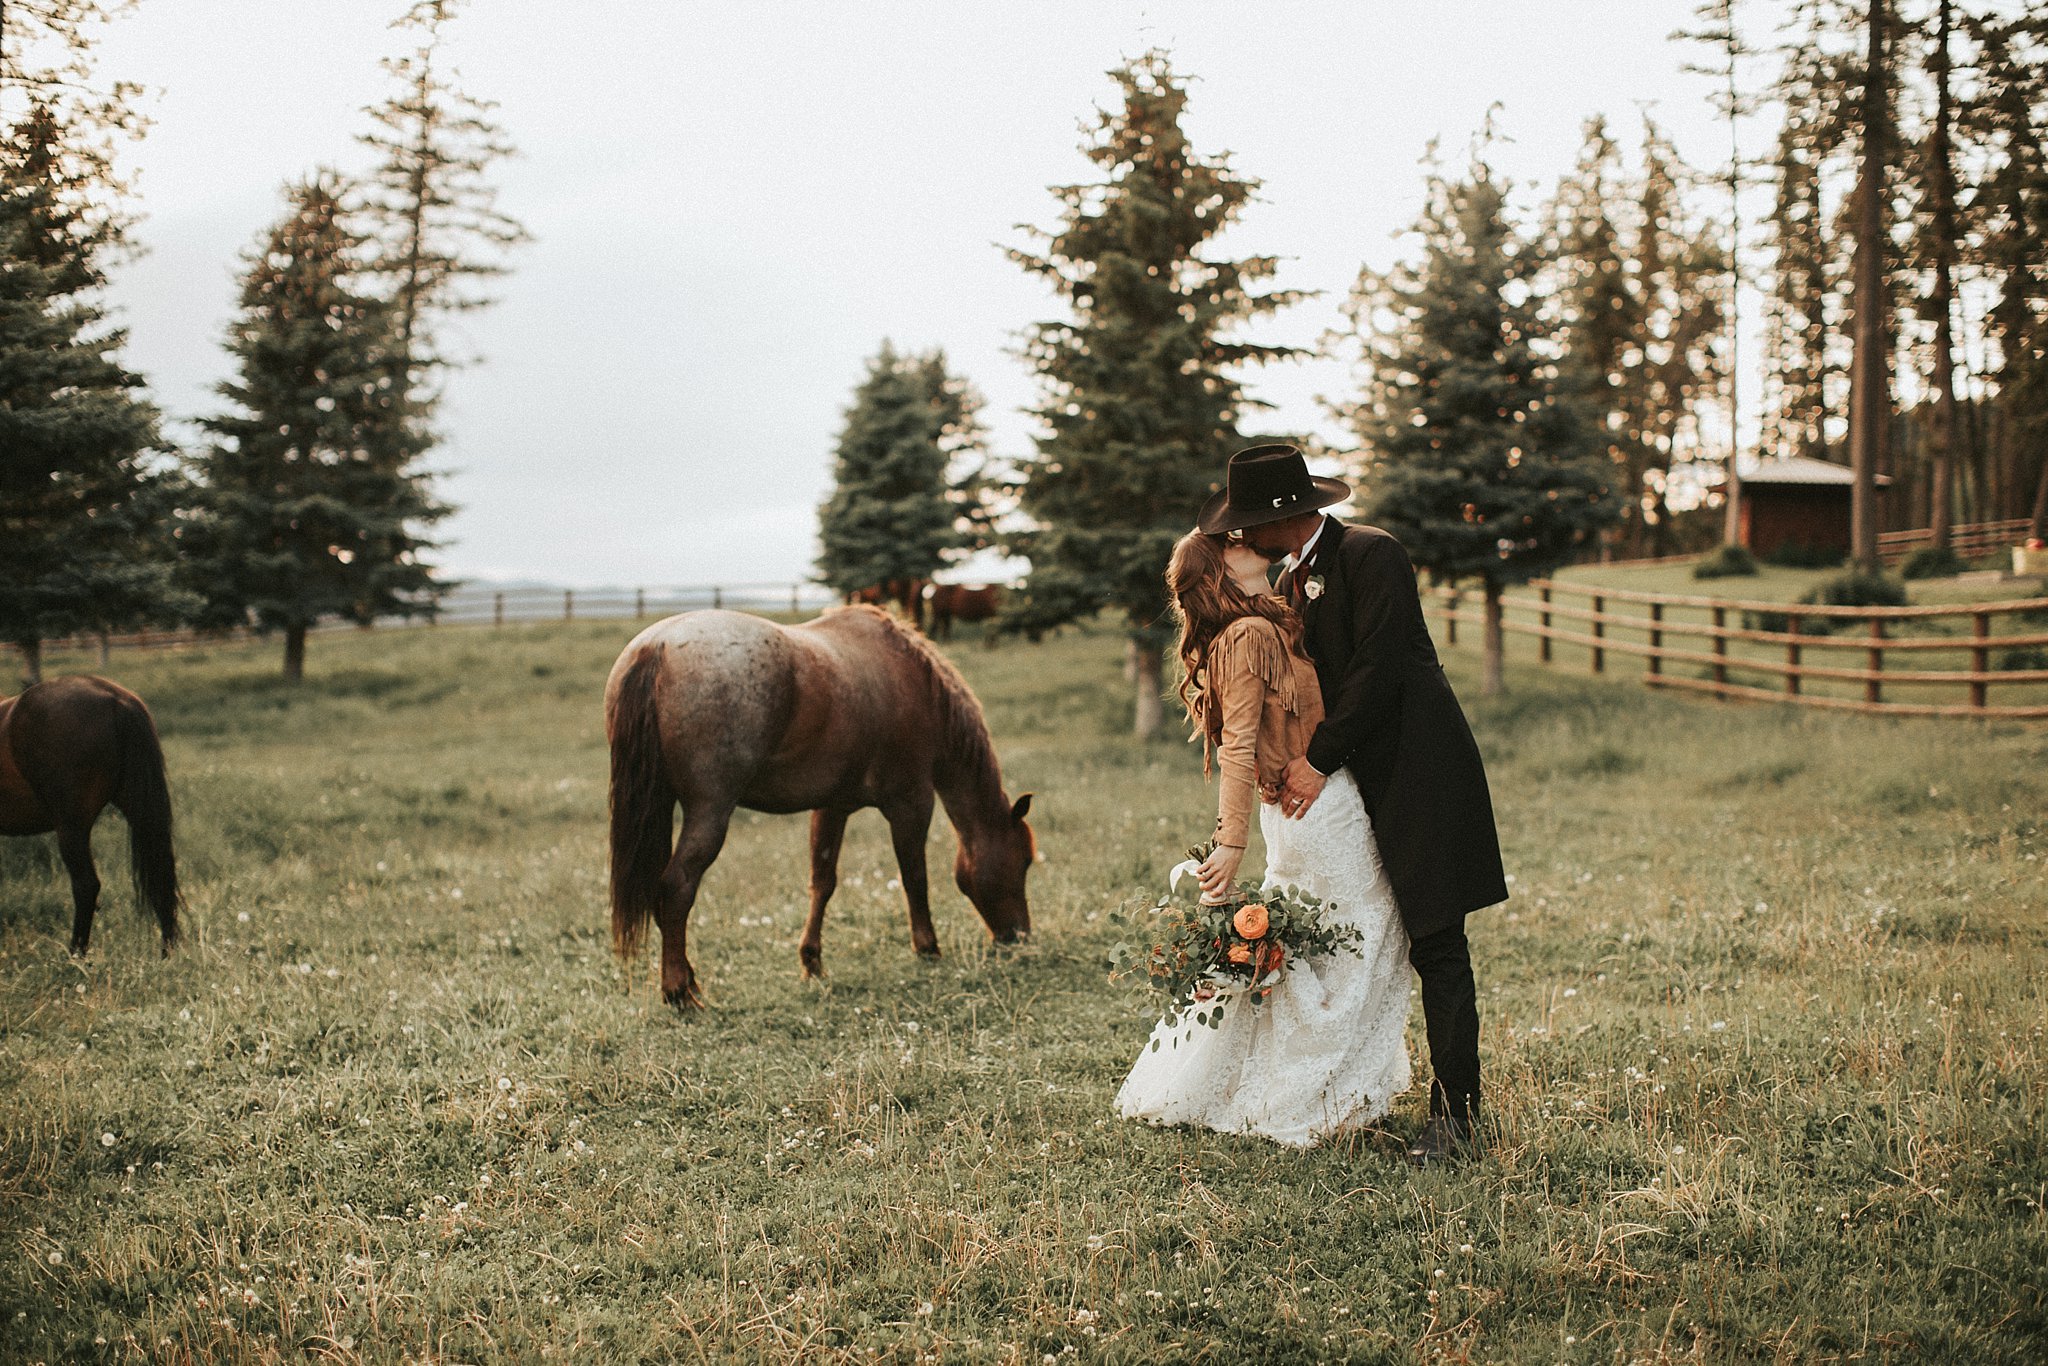 Bride and groom in a field with horses